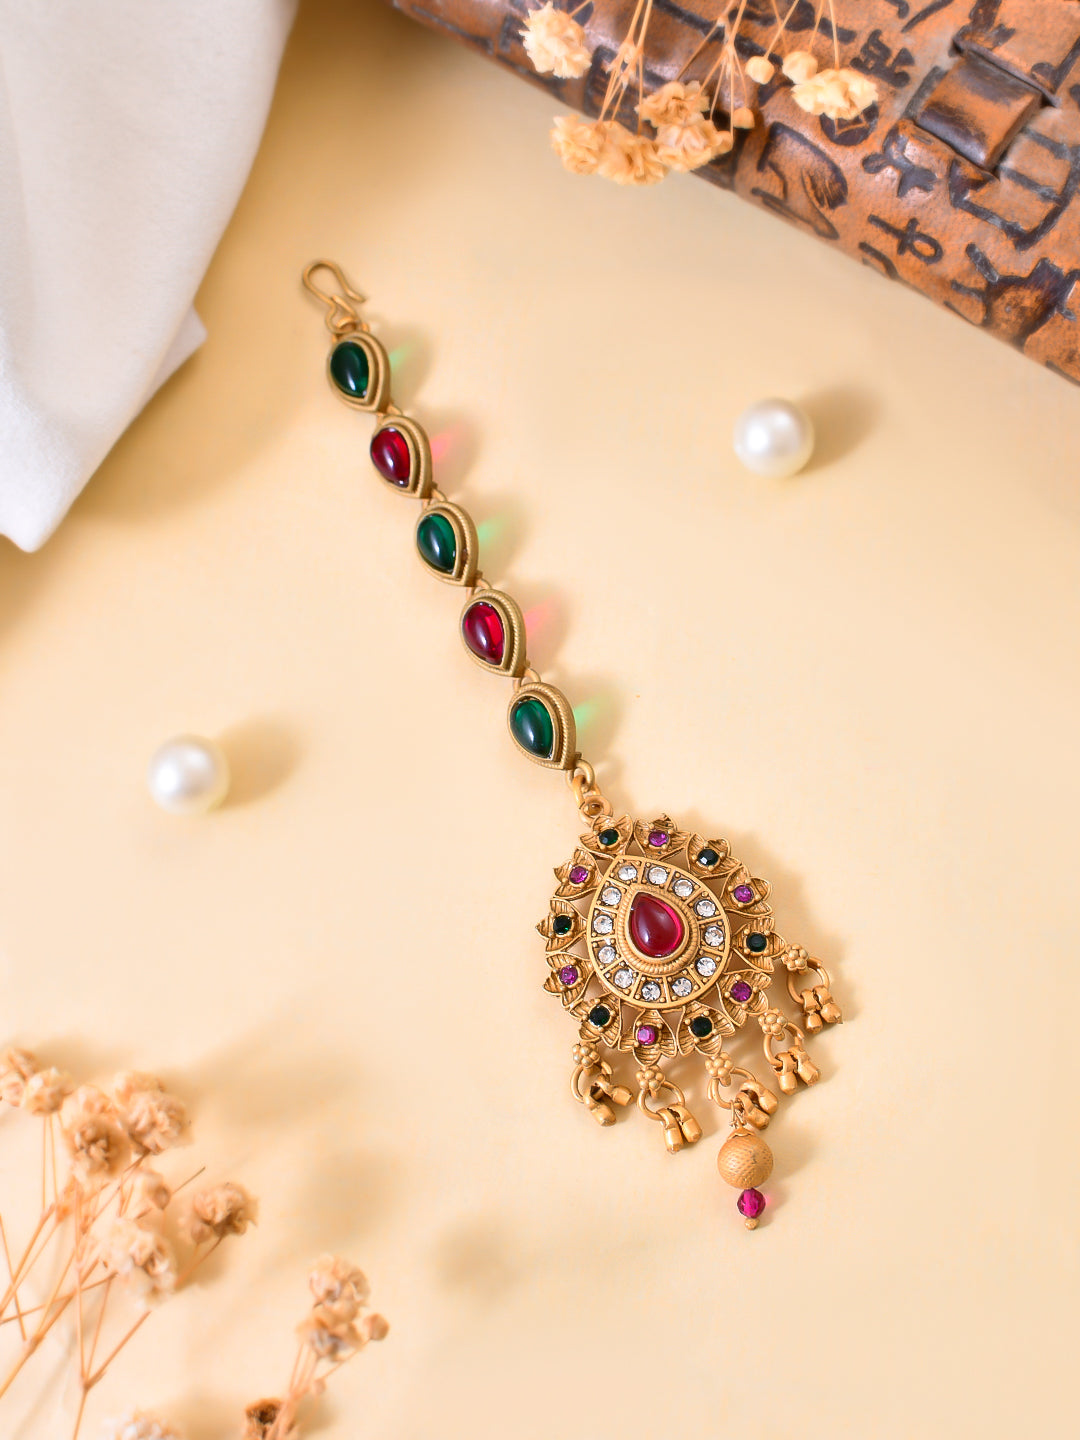 Gold Tone Maangtikka with Stones Shop now Temple Jewelry Timeless Elegance